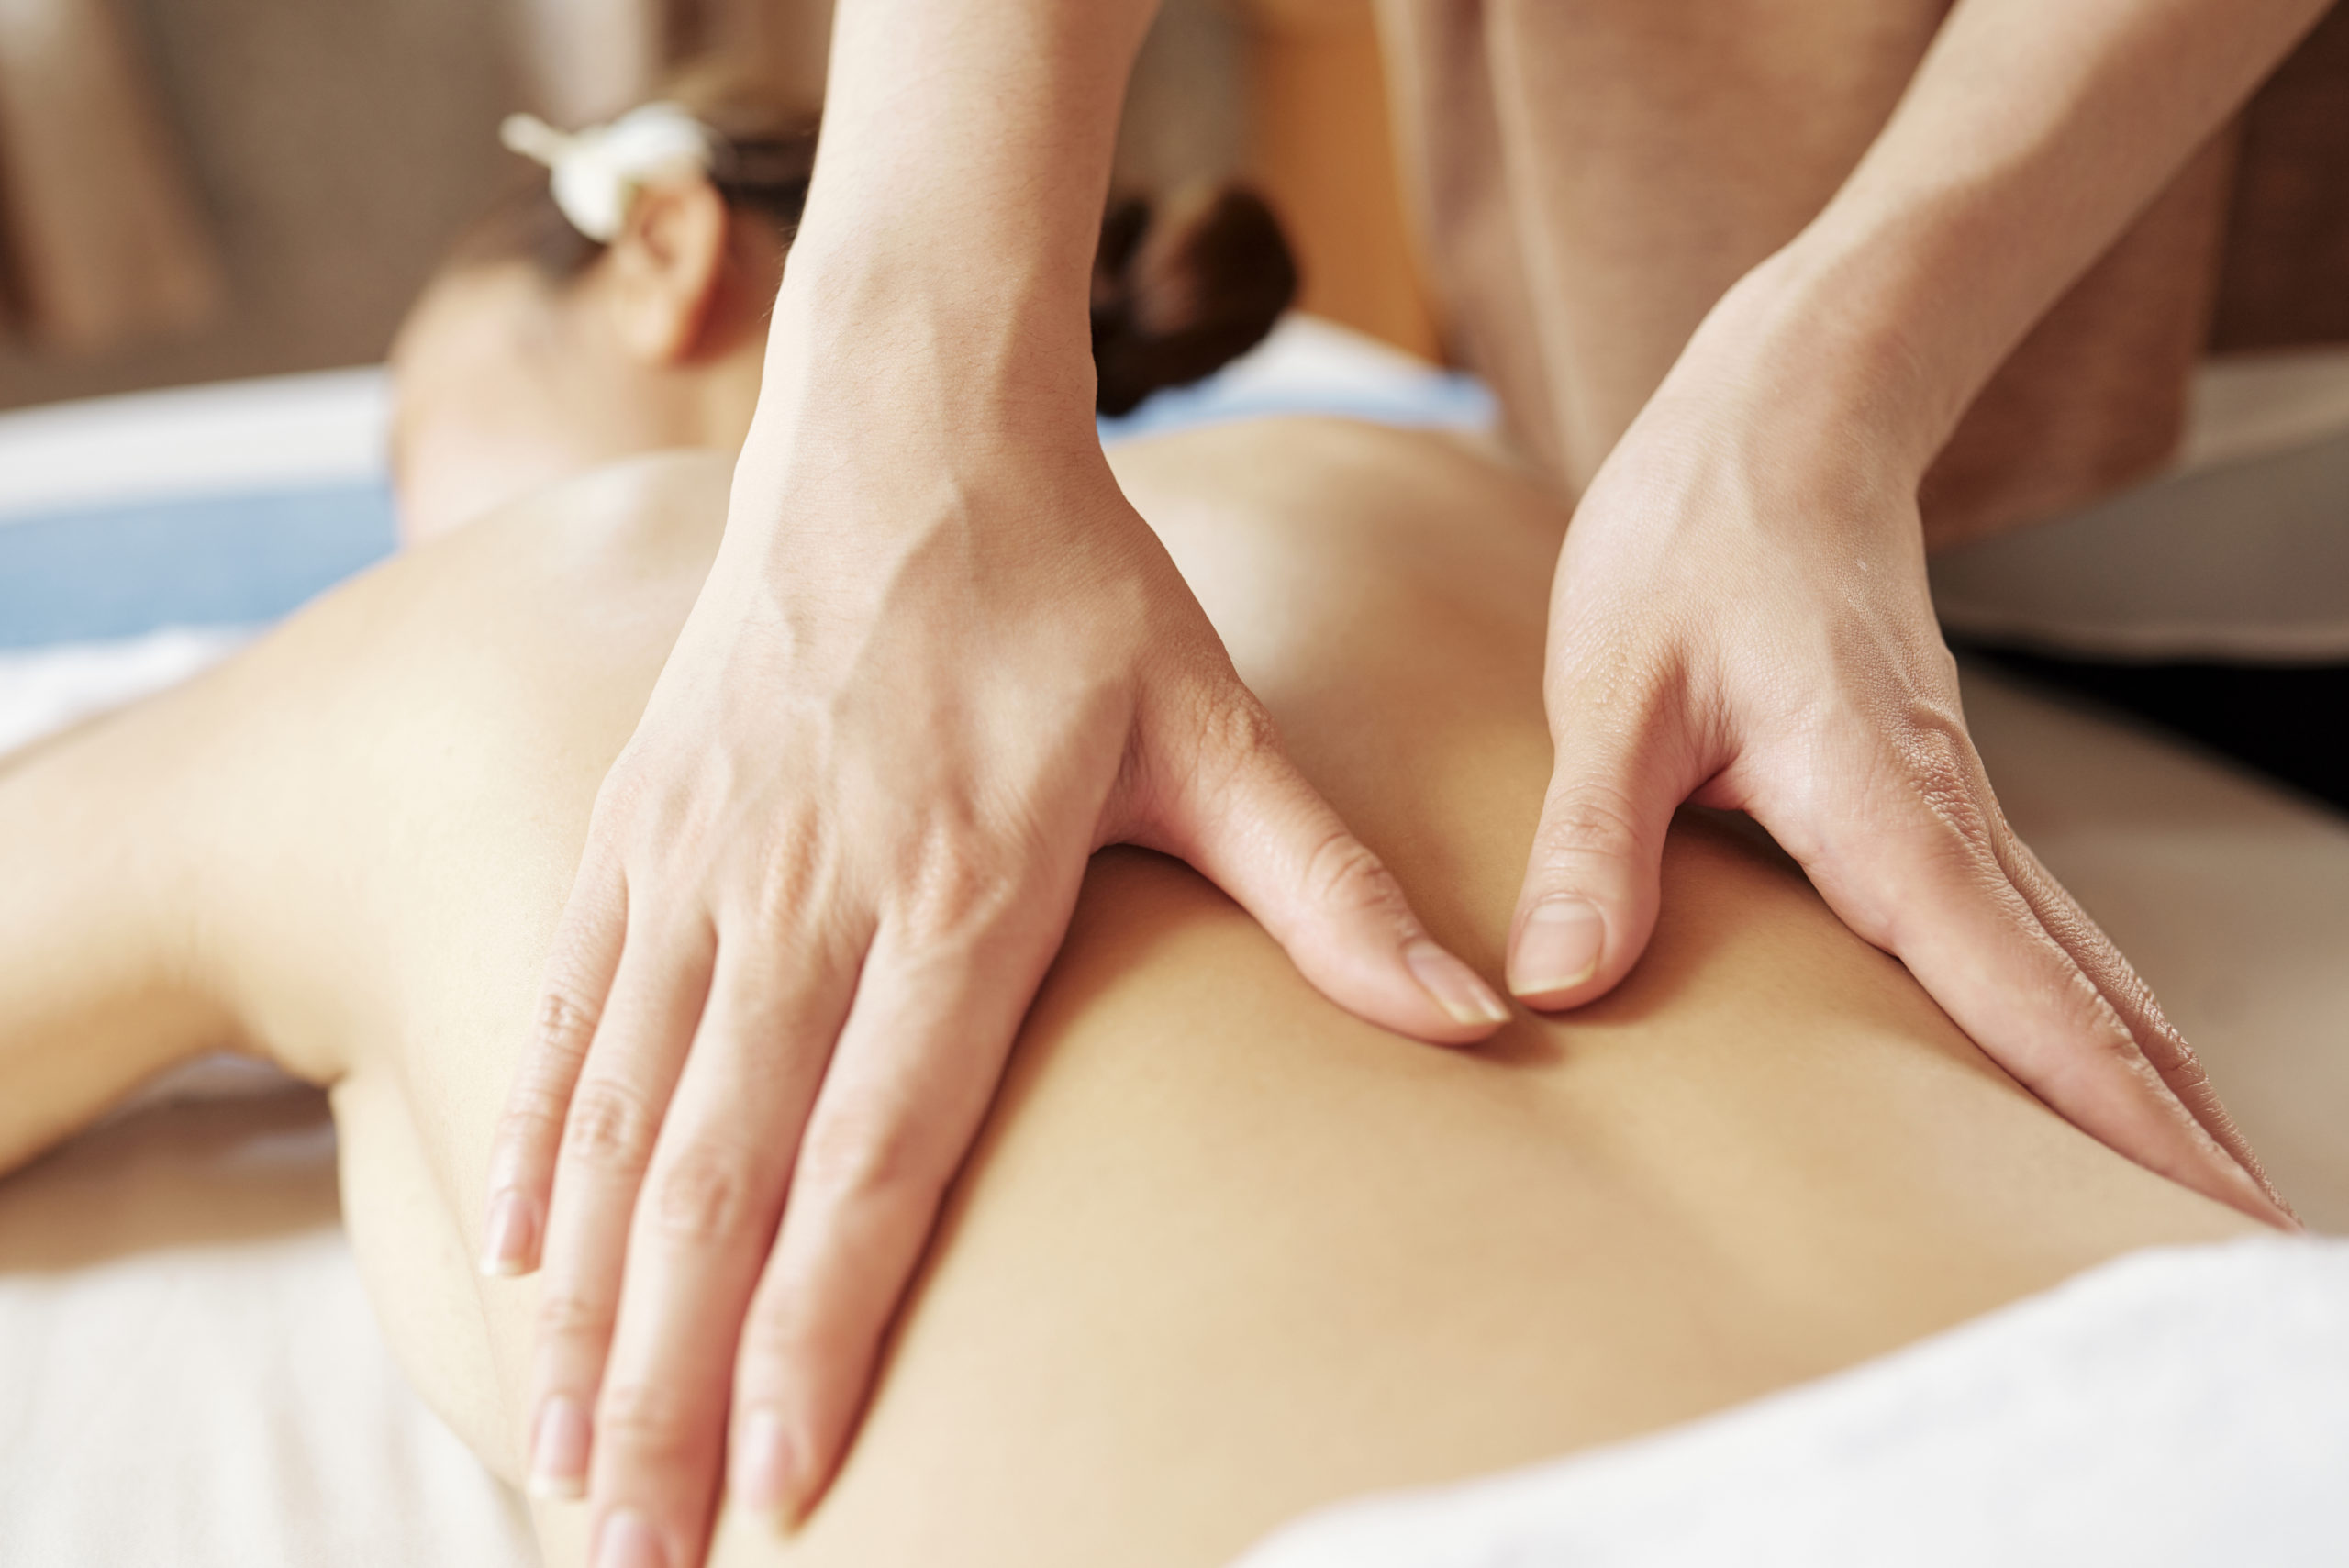 Deep Tissue Body Massage Therapy in Surrey, BC - Vital Physio